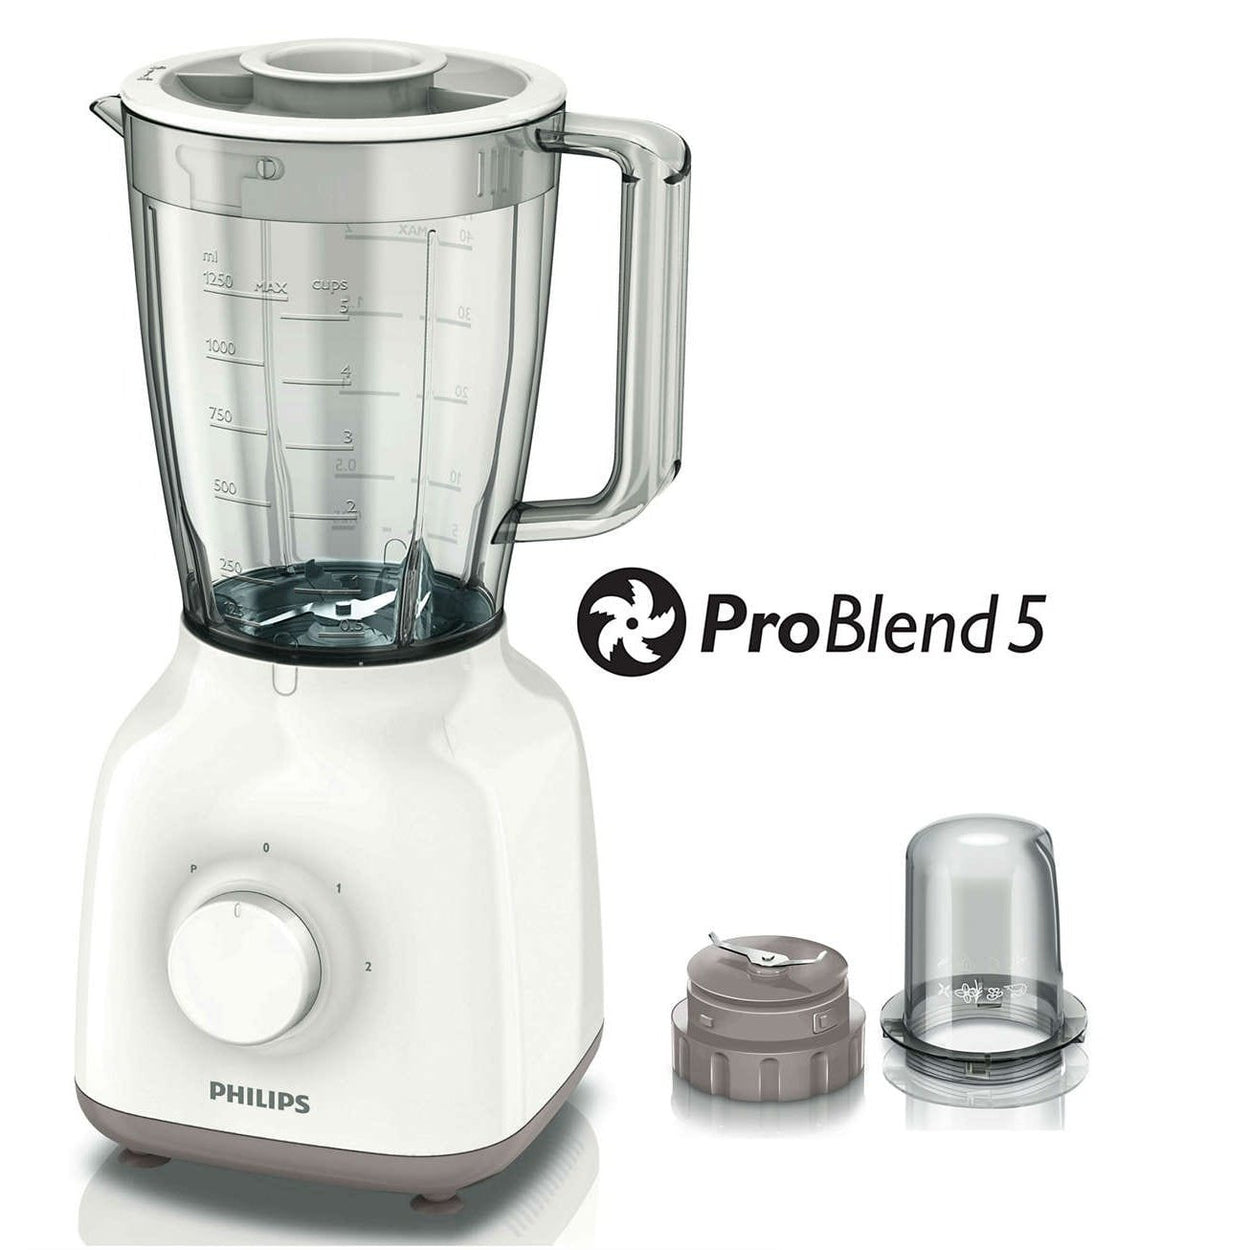 Philips 1.25L Stand Blender 450W - HR2058 | Supply Master Accra, Ghana Kitchen Appliances Buy Tools hardware Building materials